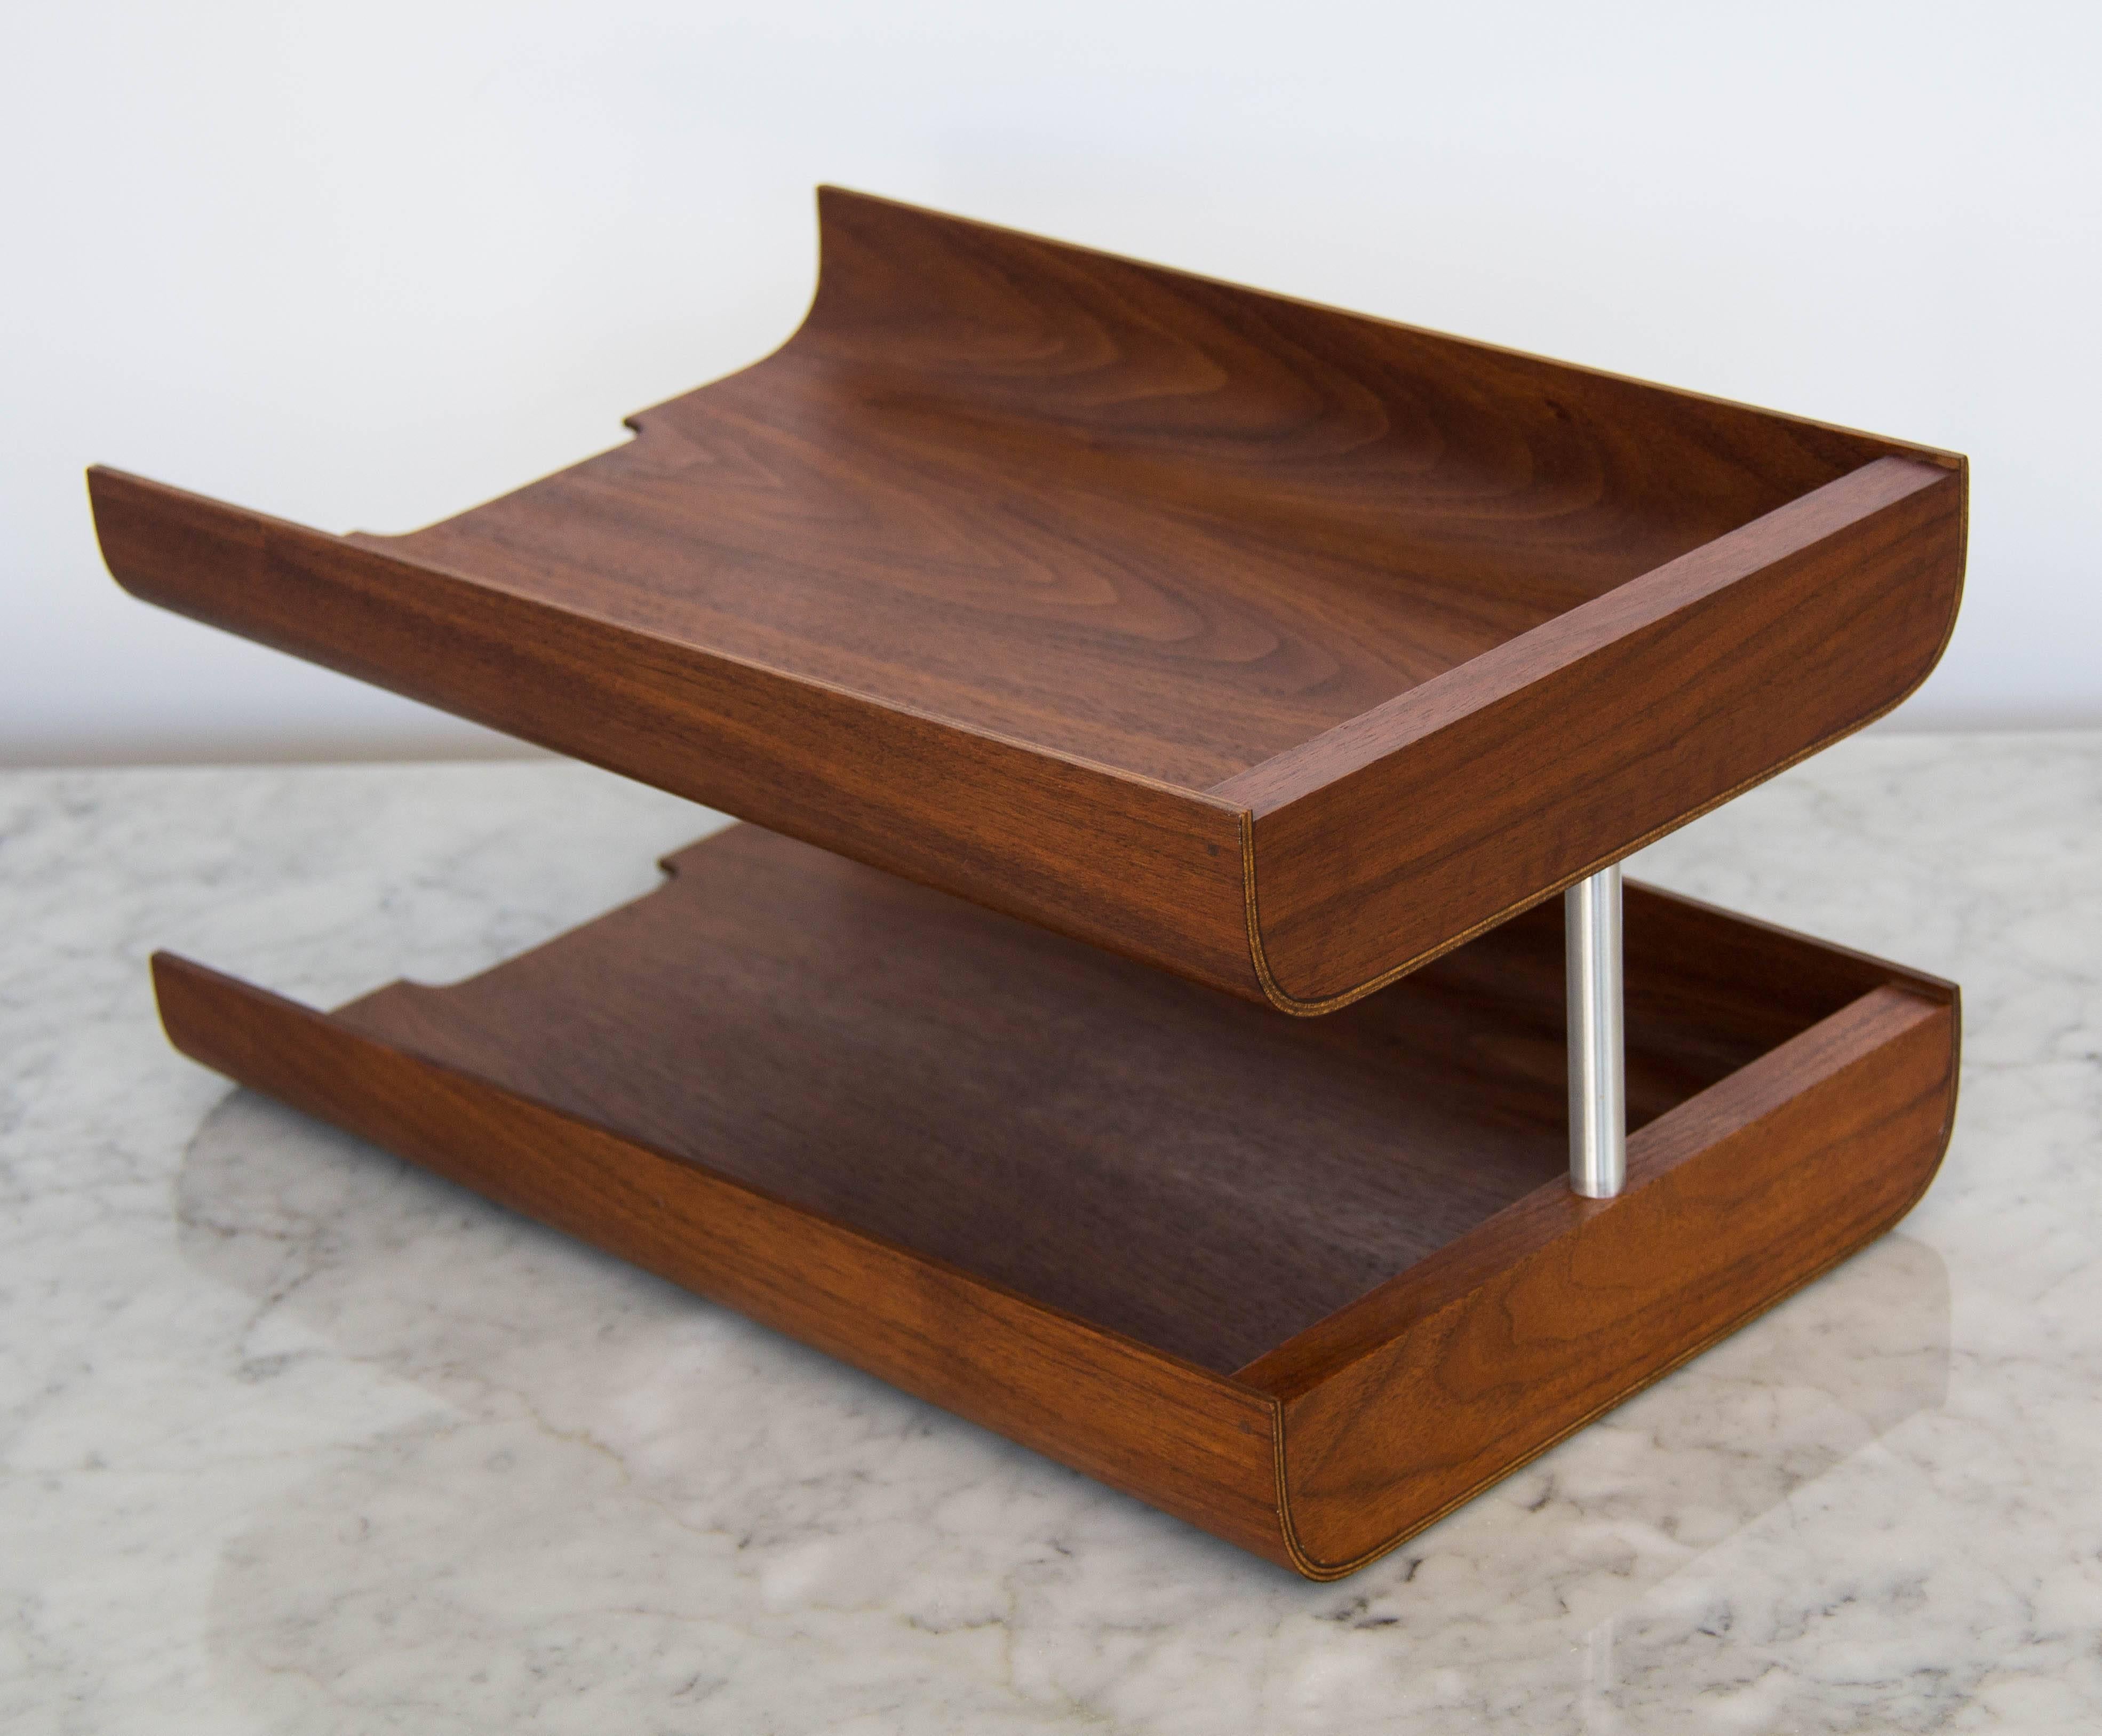 Swedish design house Rainbow Wood products specialized in streamlined home accessories in teak veneer. This paper tray has two tiers with a wedge-shaped design and notched edges, connected by a brushed steel post.

Condition: Professionally